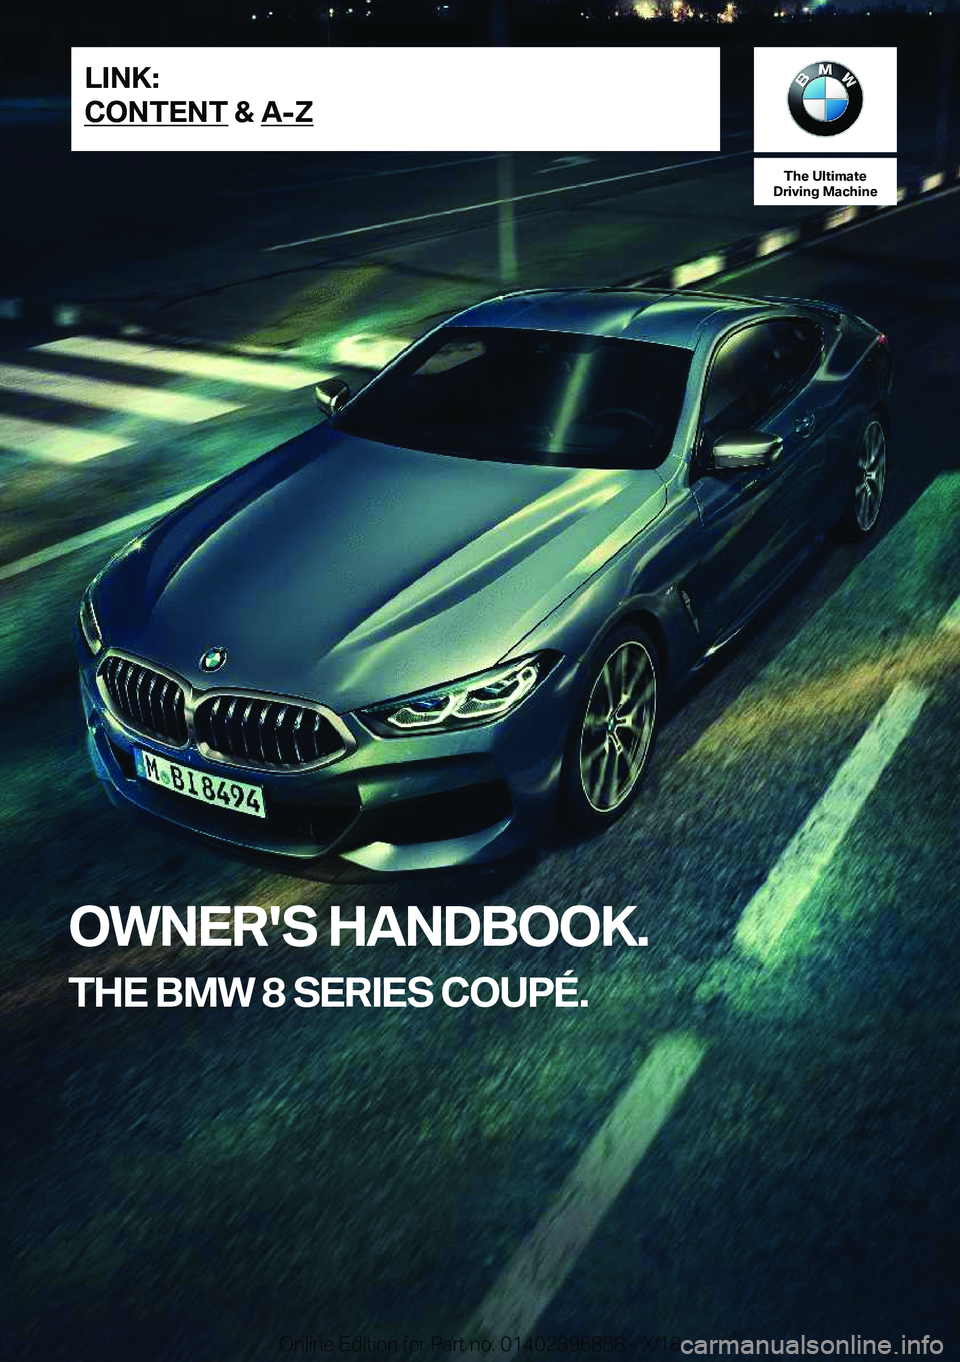 BMW 8 SERIES COUPE 2019  Owners Manual �T�h�e��U�l�t�i�m�a�t�e
�D�r�i�v�i�n�g��M�a�c�h�i�n�e
�O�W�N�E�R�'�S��H�A�N�D�B�O�O�K�.
�T�H�E��B�M�W��8��S�E�R�I�E�S��C�O�U�P�